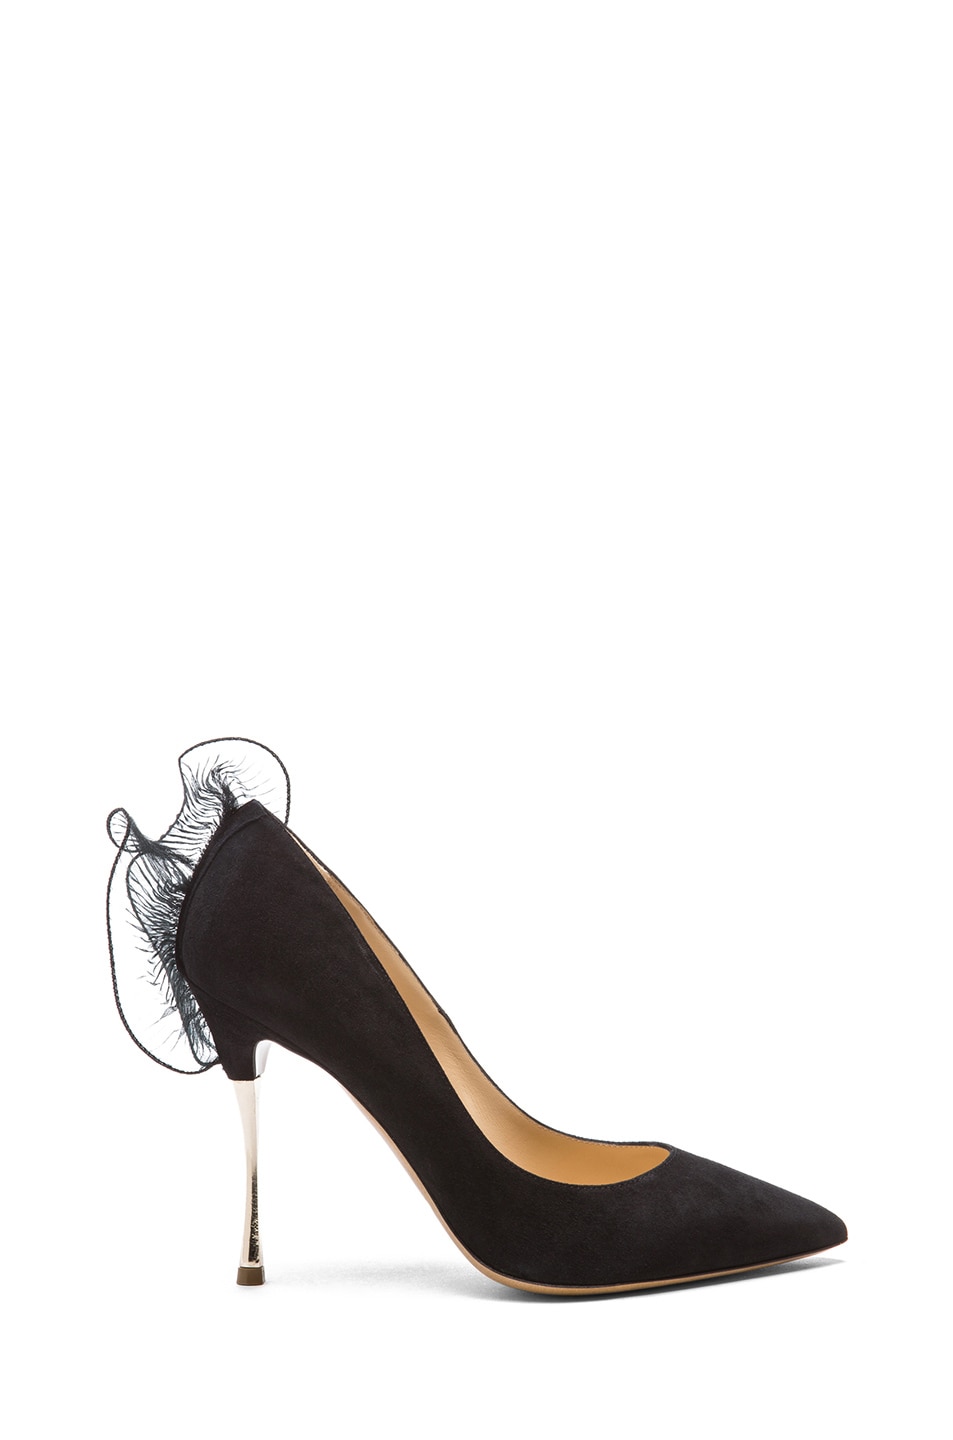 Image 1 of Nicholas Kirkwood Suede Pumps with Ruffle Back in Black & Gold